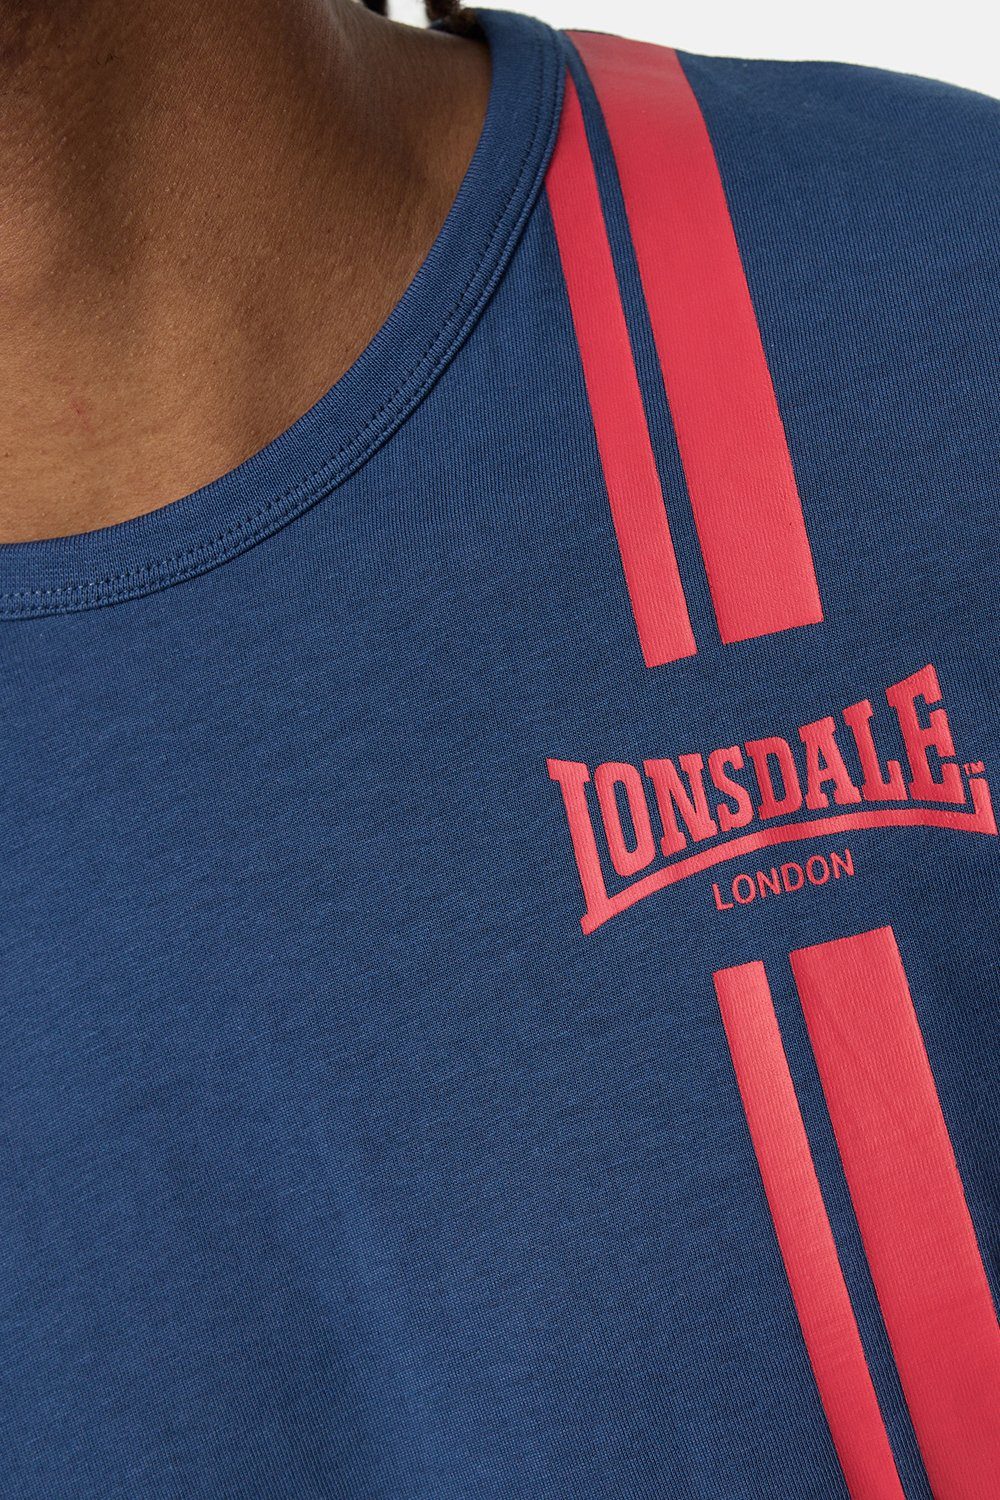 INVERBROOM Lonsdale Navy/Red T-Shirt